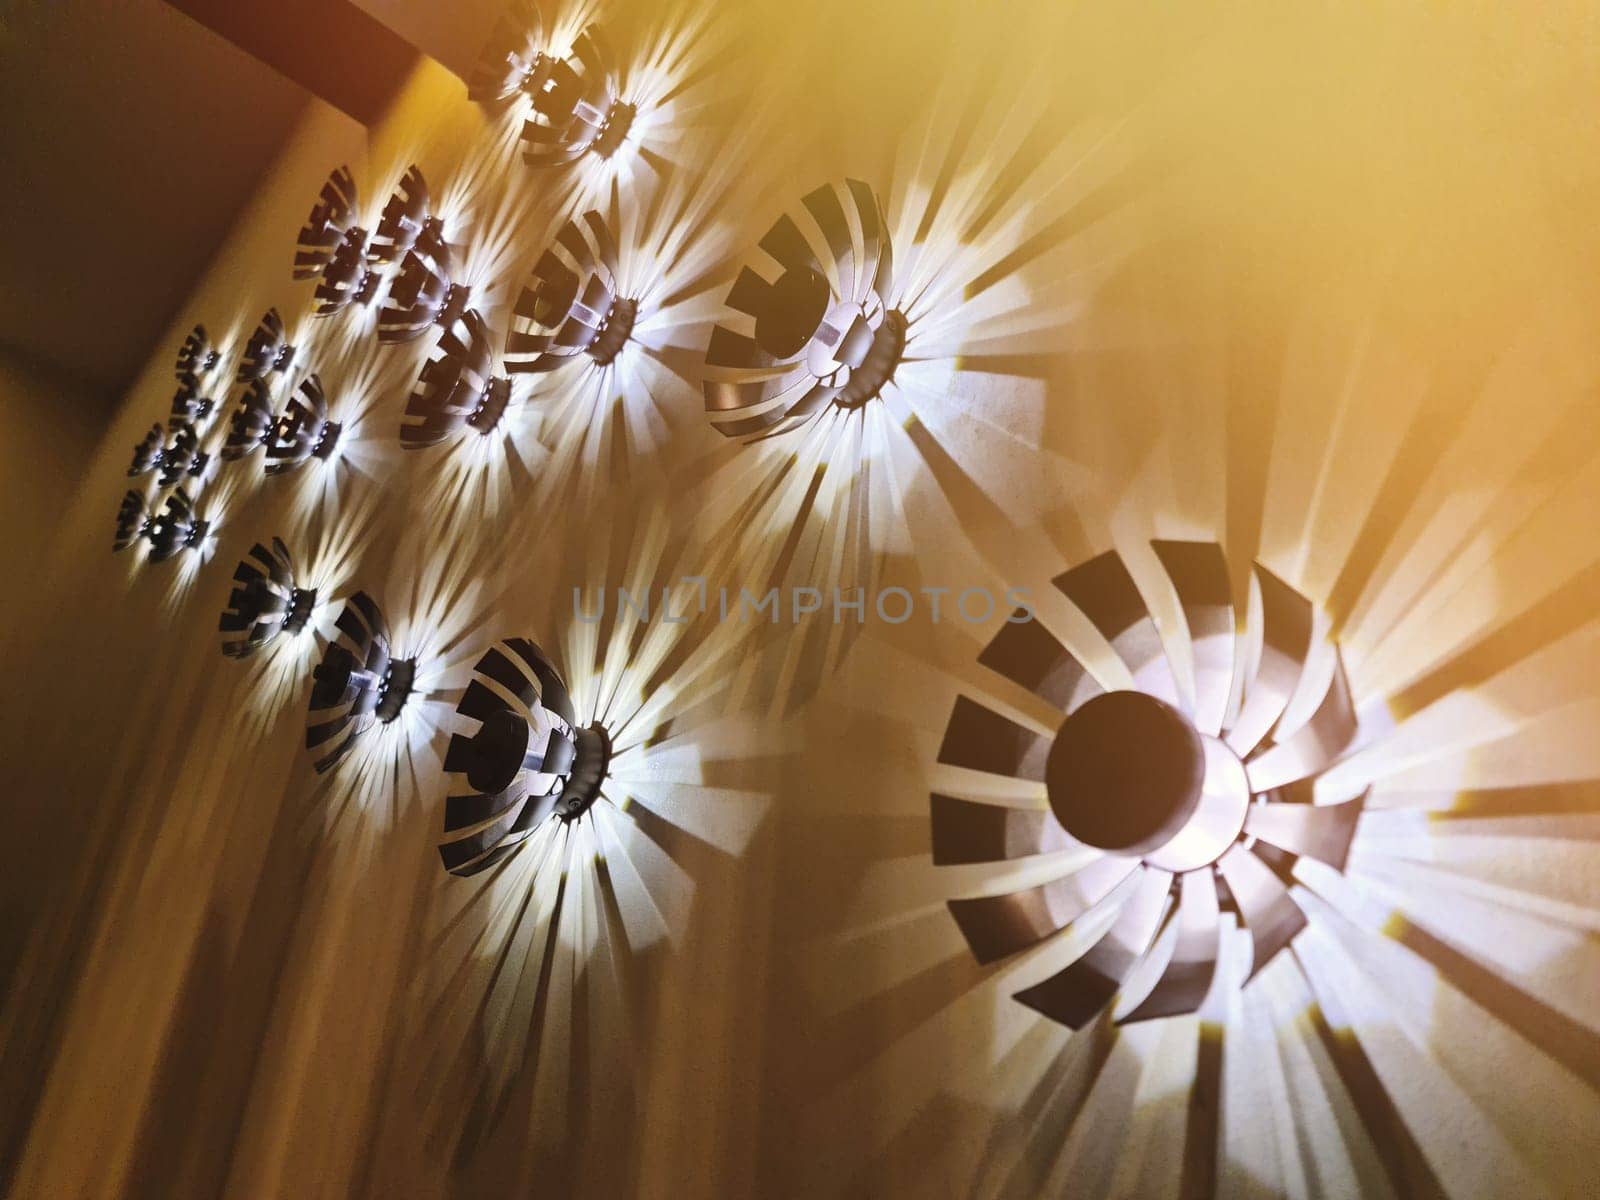 A group of decorative modern light elements in the interior on the wall, giving a light-shadow pattern by Rom4ek